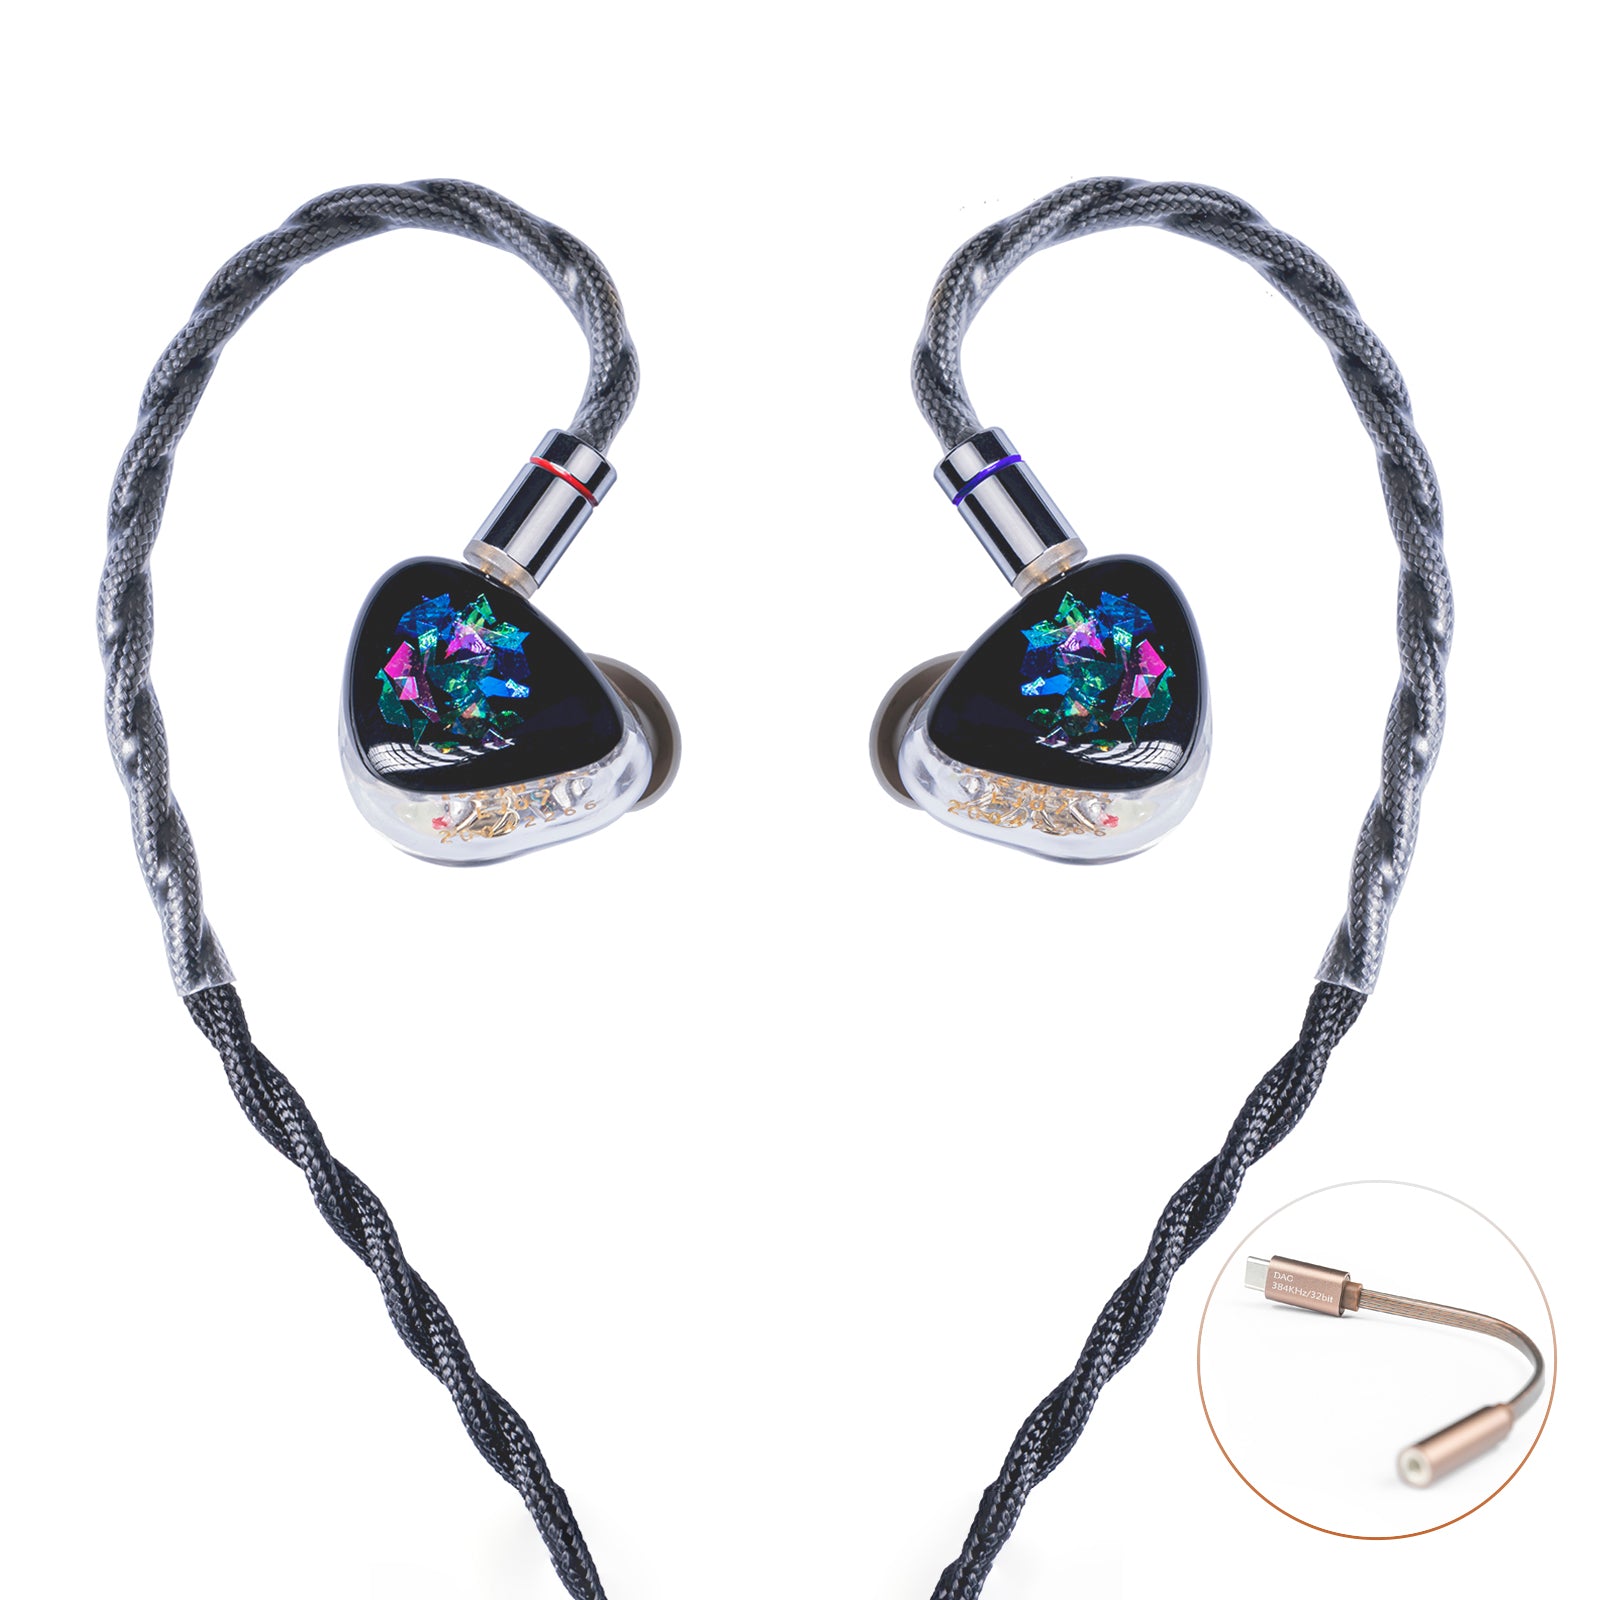 EJ07 - Best musicians in ear monitors for classic and symphony